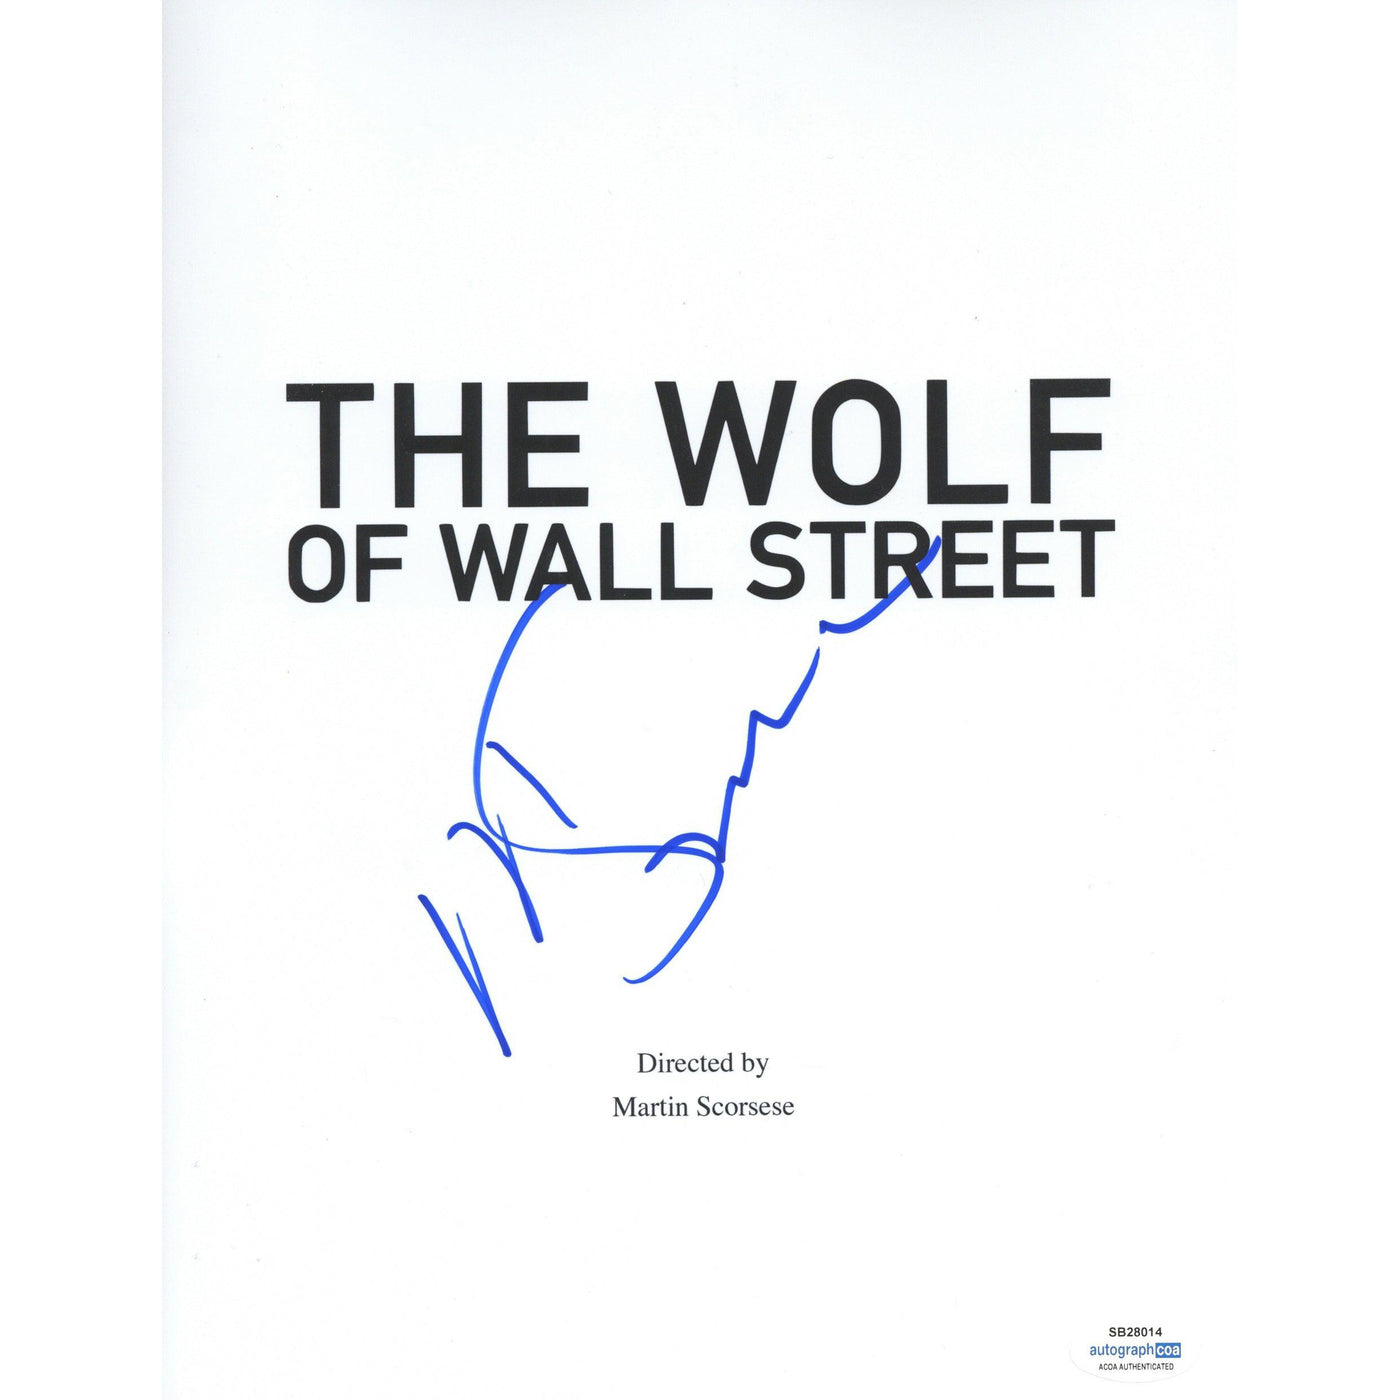 Martin Scorsese Signed Movie Script Cover The Wolf Of Wall Street Autographed ACOA